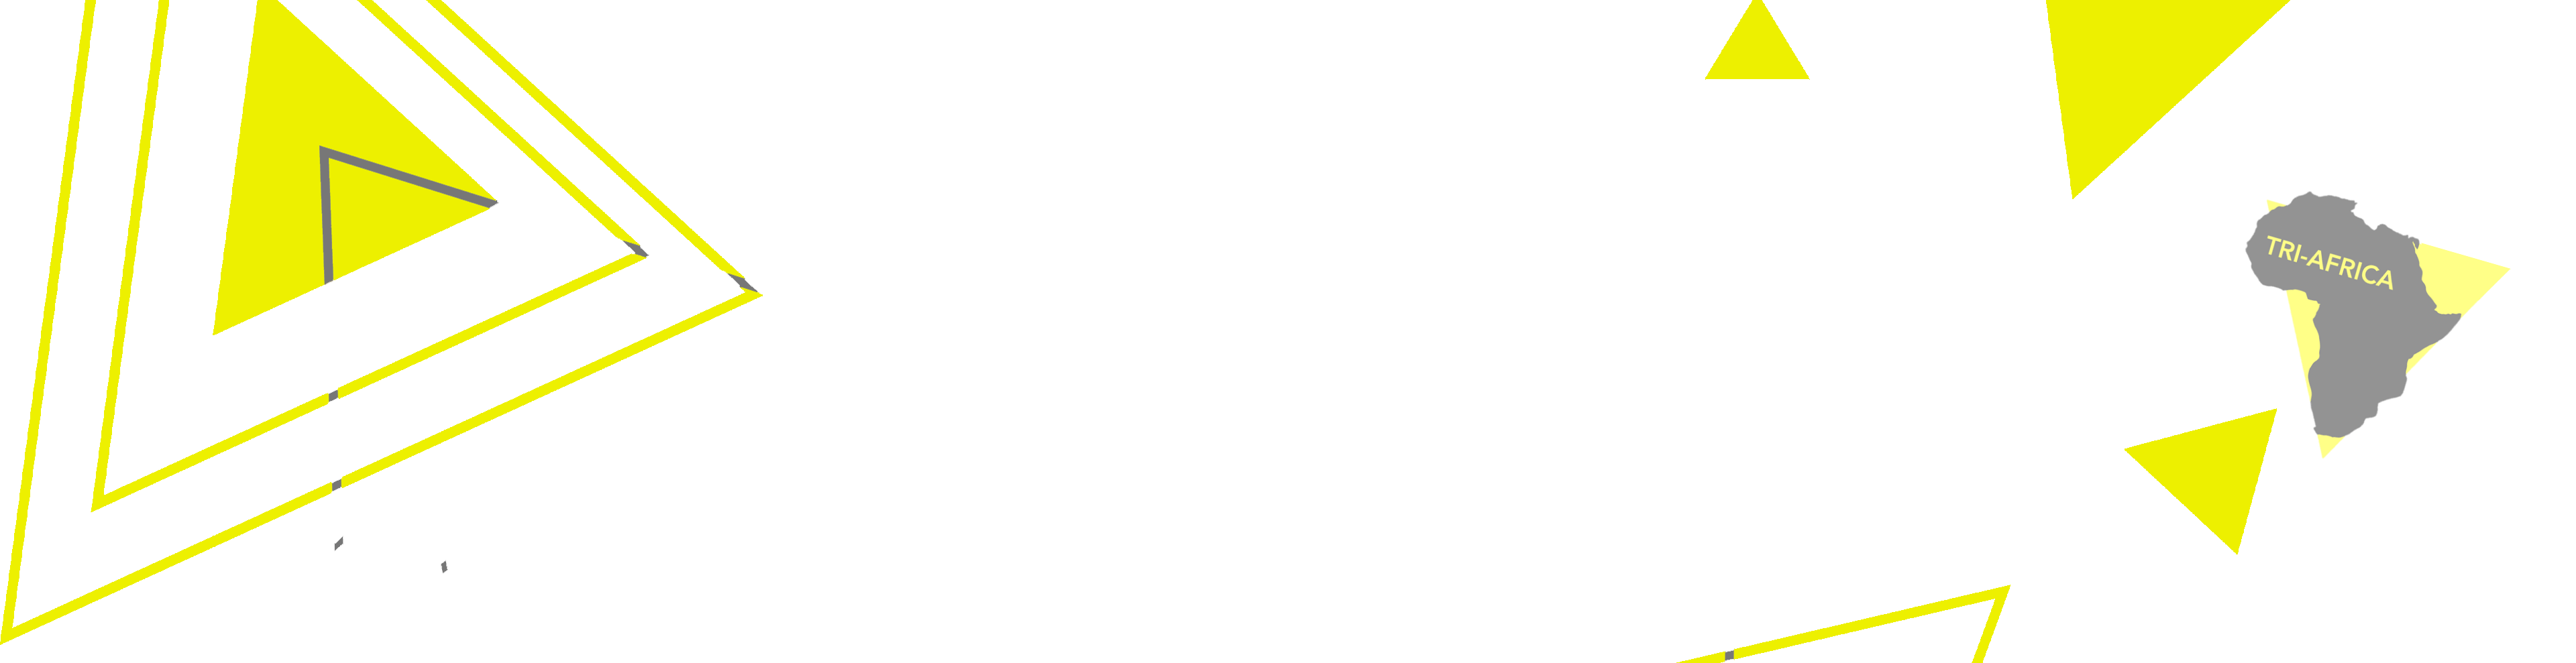 Lords of harlech brand top image